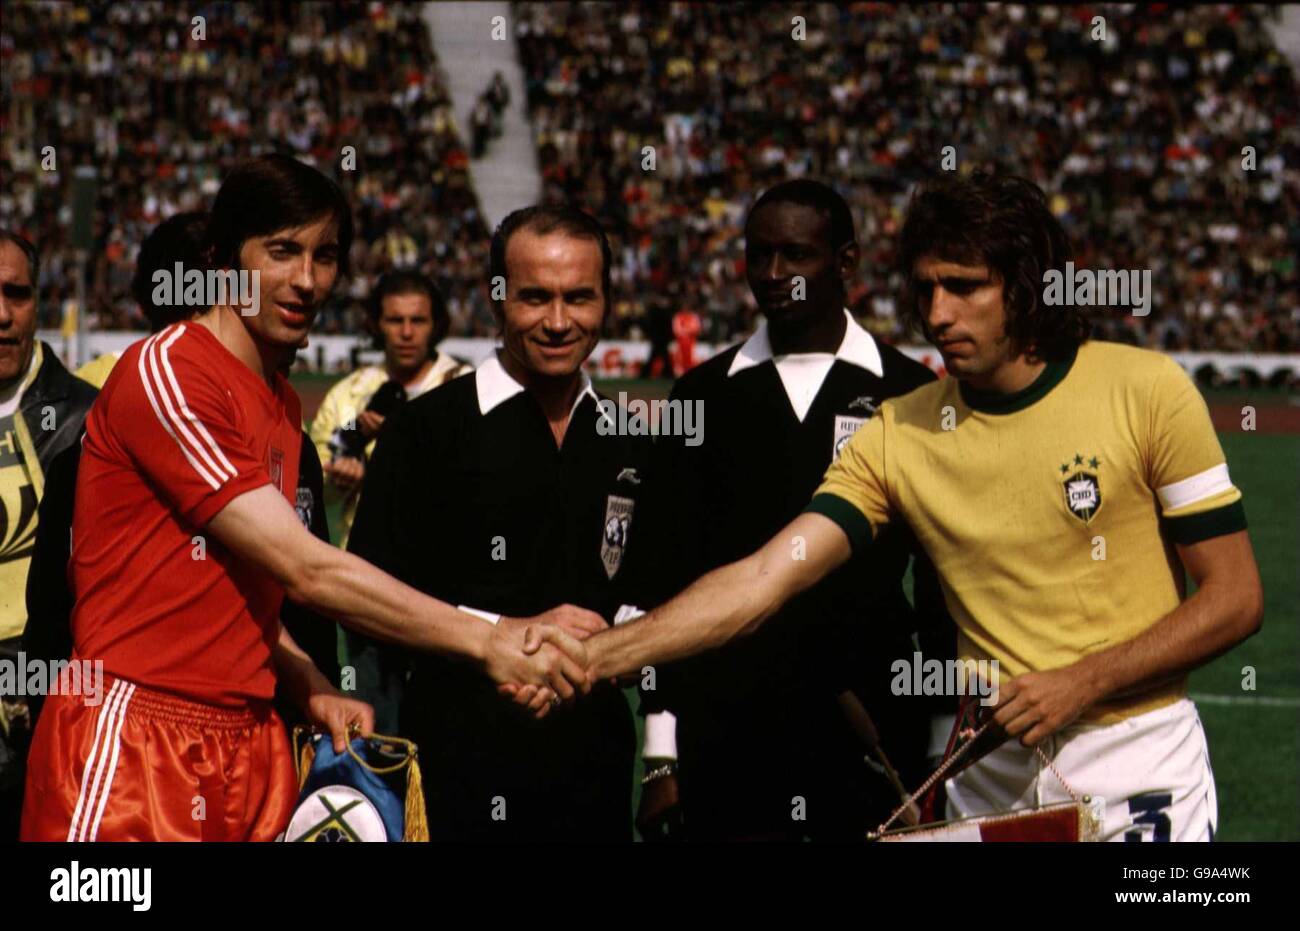 The two captains shake hands before the match l-r Kazimierz Deyna (Poland), Mr. Angonese (referee), Mr. N'Diaye (linesman) and Mario Marinho (Brazil) Stock Photo